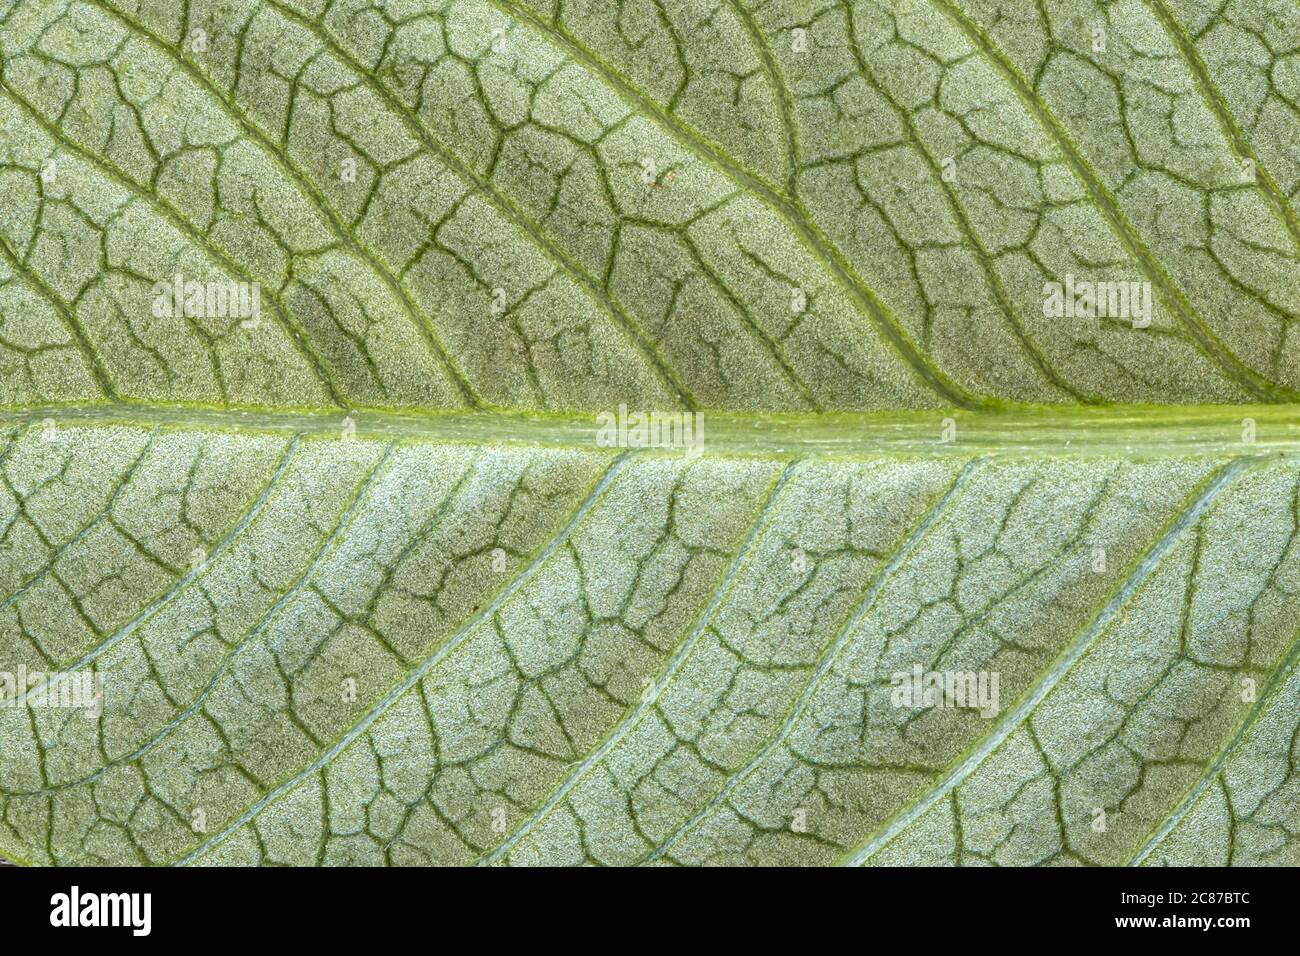 Highly detailed image of green leaf texture, background Stock Photo